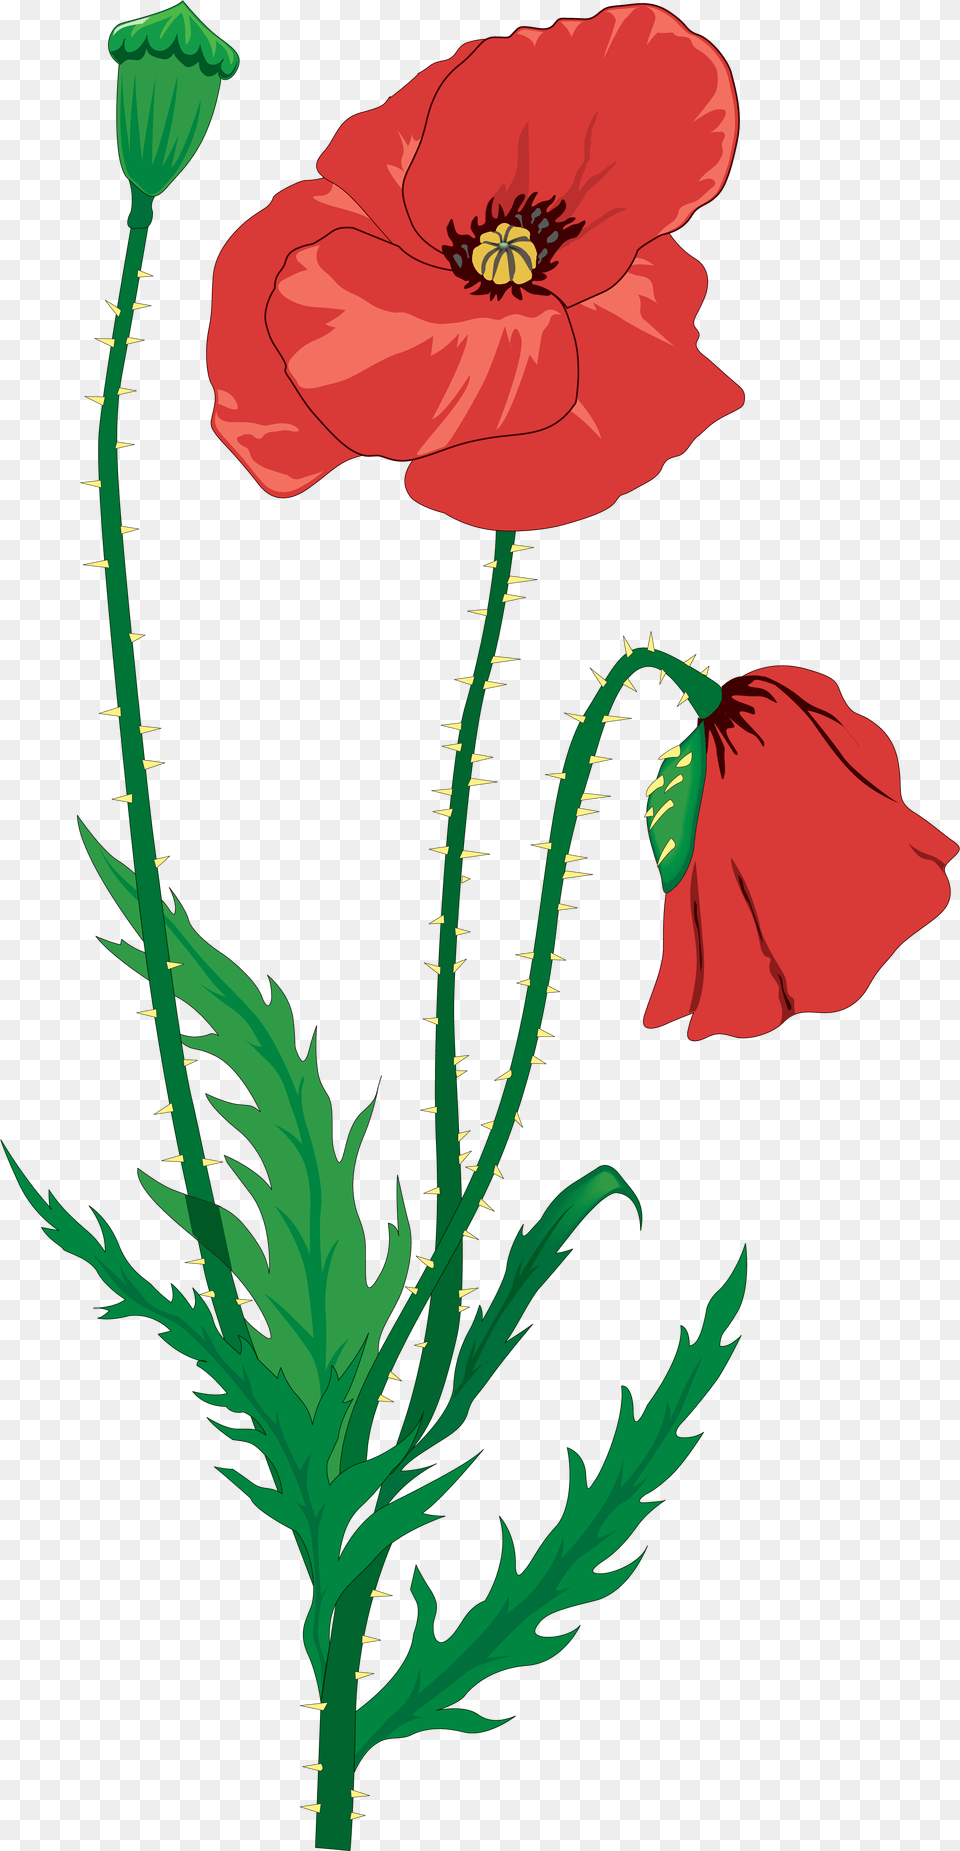 Drawing Flower Clip Art Memorial Day And Poppies Poppies Poem Ww1, Plant, Poppy, Rose Png